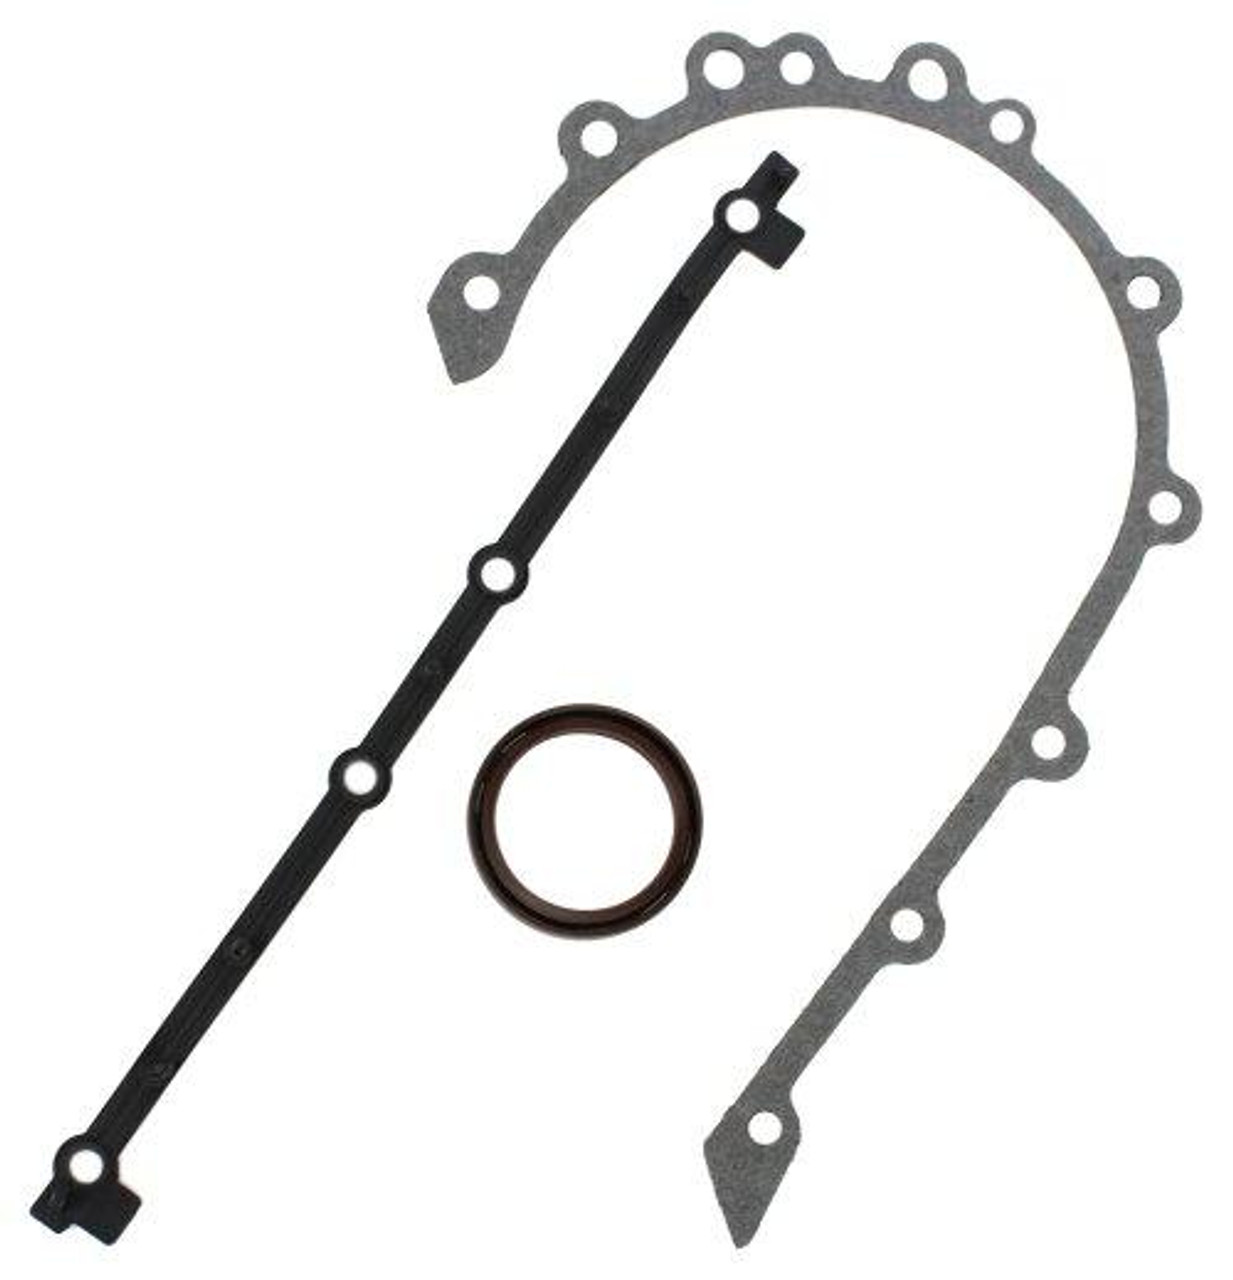 Timing Cover Gasket Set - 1986 Jeep Grand Wagoneer 4.2L Engine Parts # TC1122ZE51